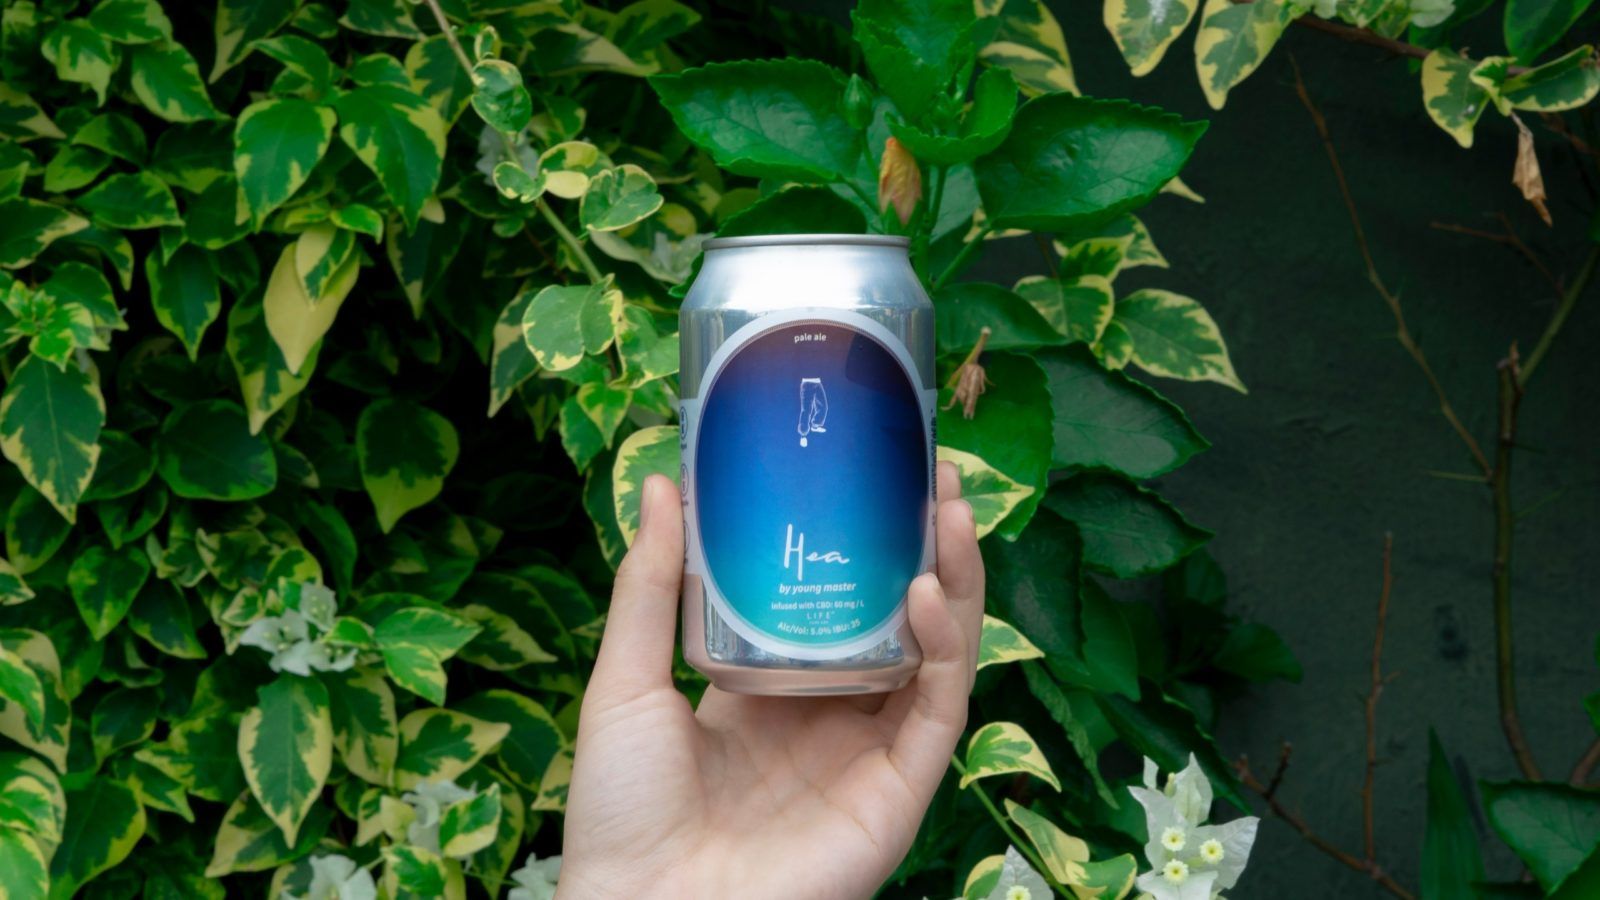 Where to find CBD beer in Hong Kong